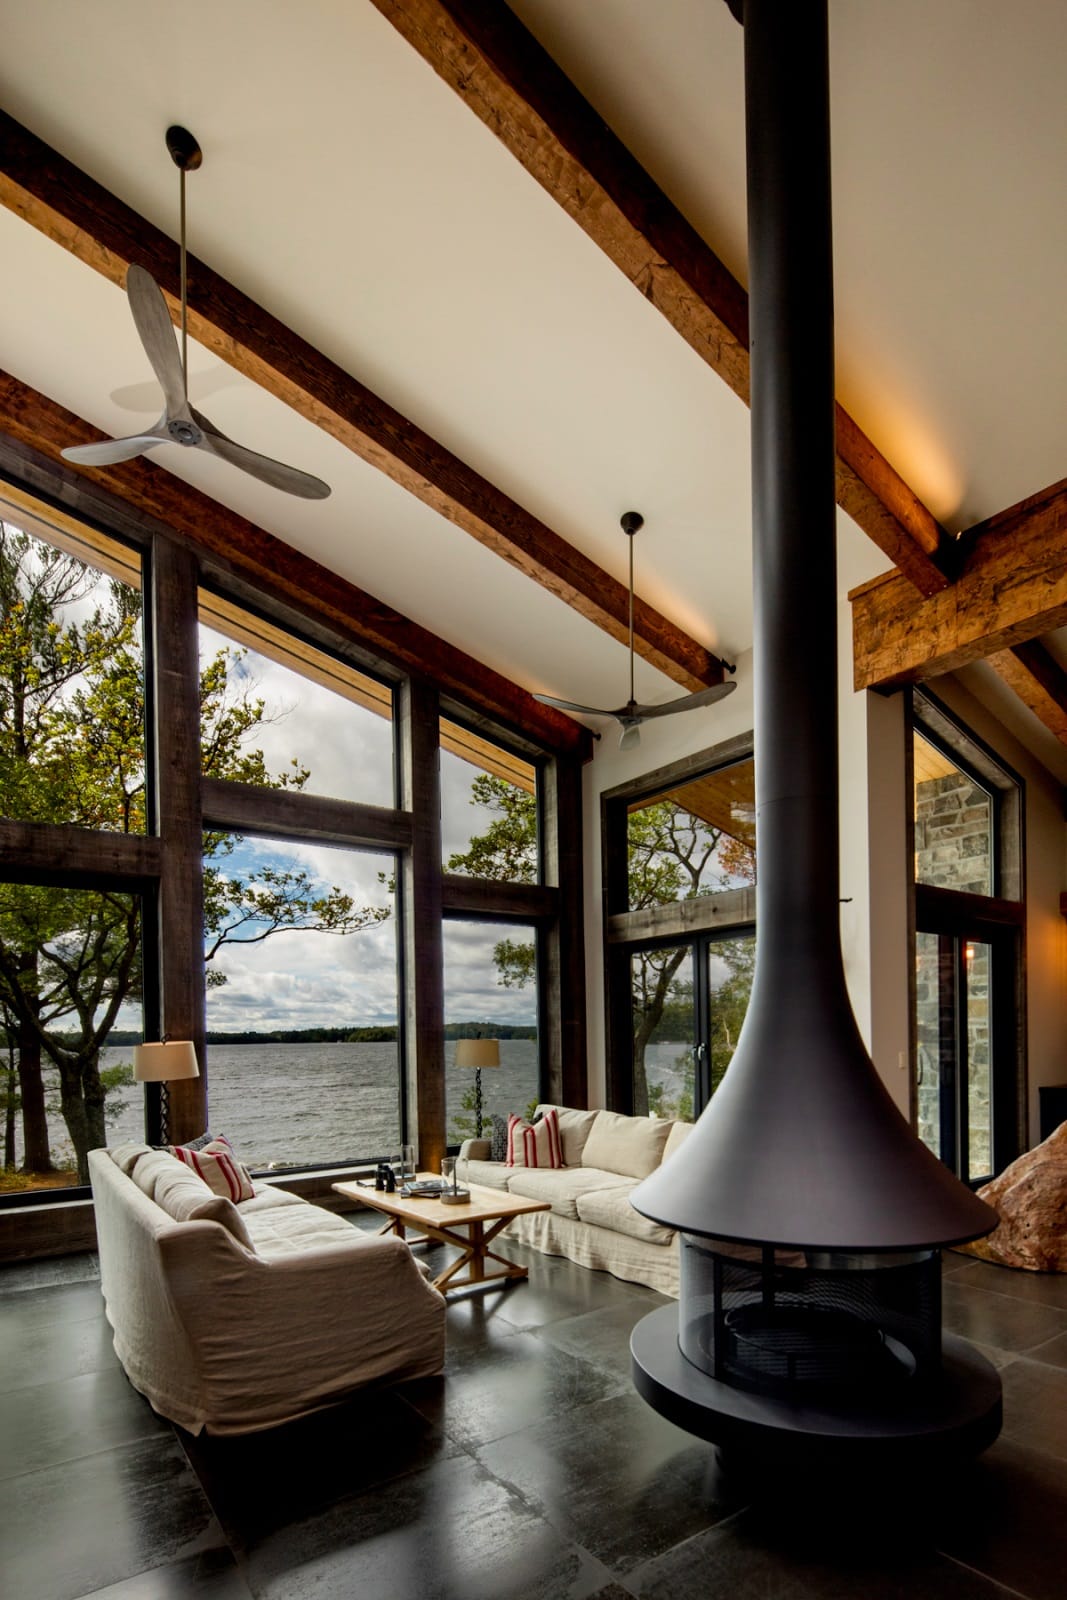 How To Get The Chic Lake Rosseau Cottage Style On Any Lake 1